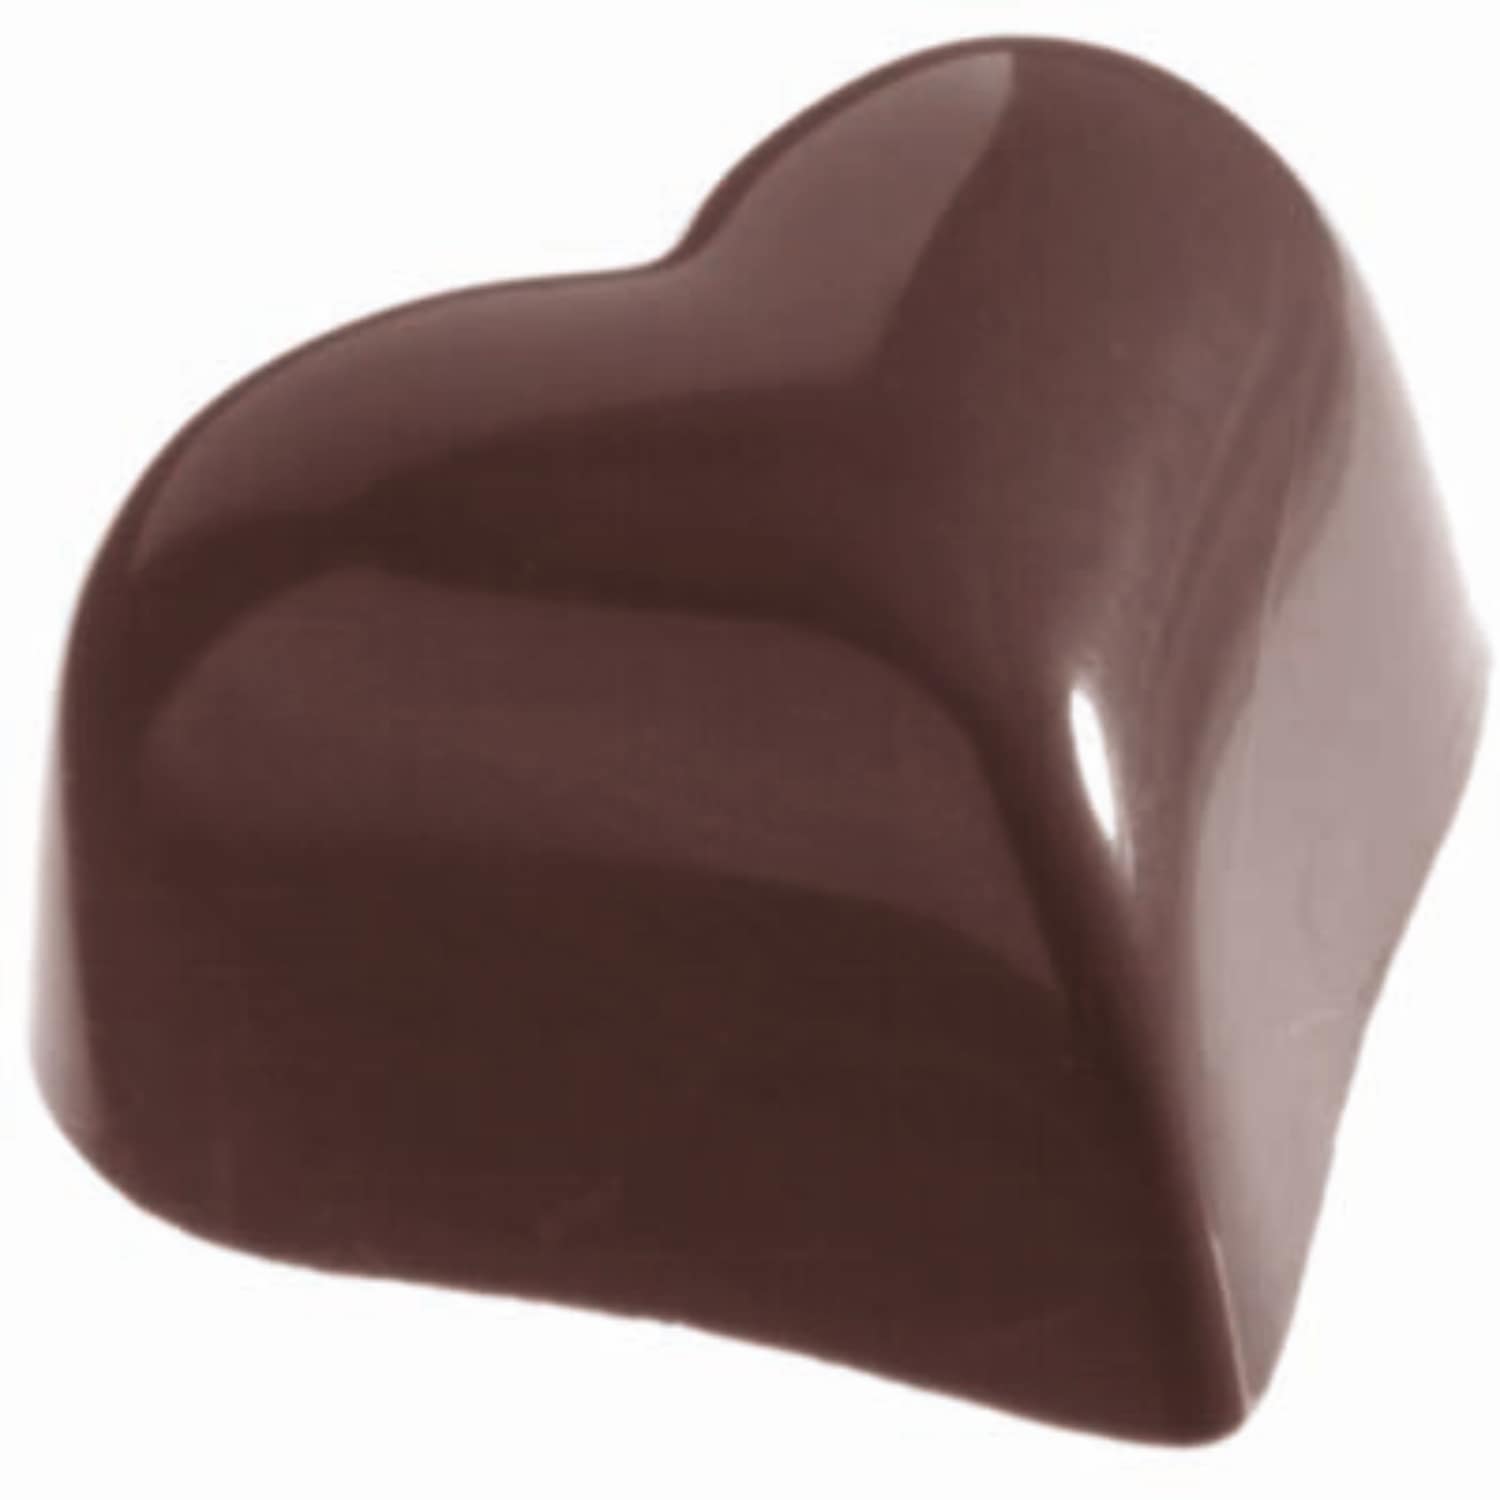 Chocolate mould "heart" 421526